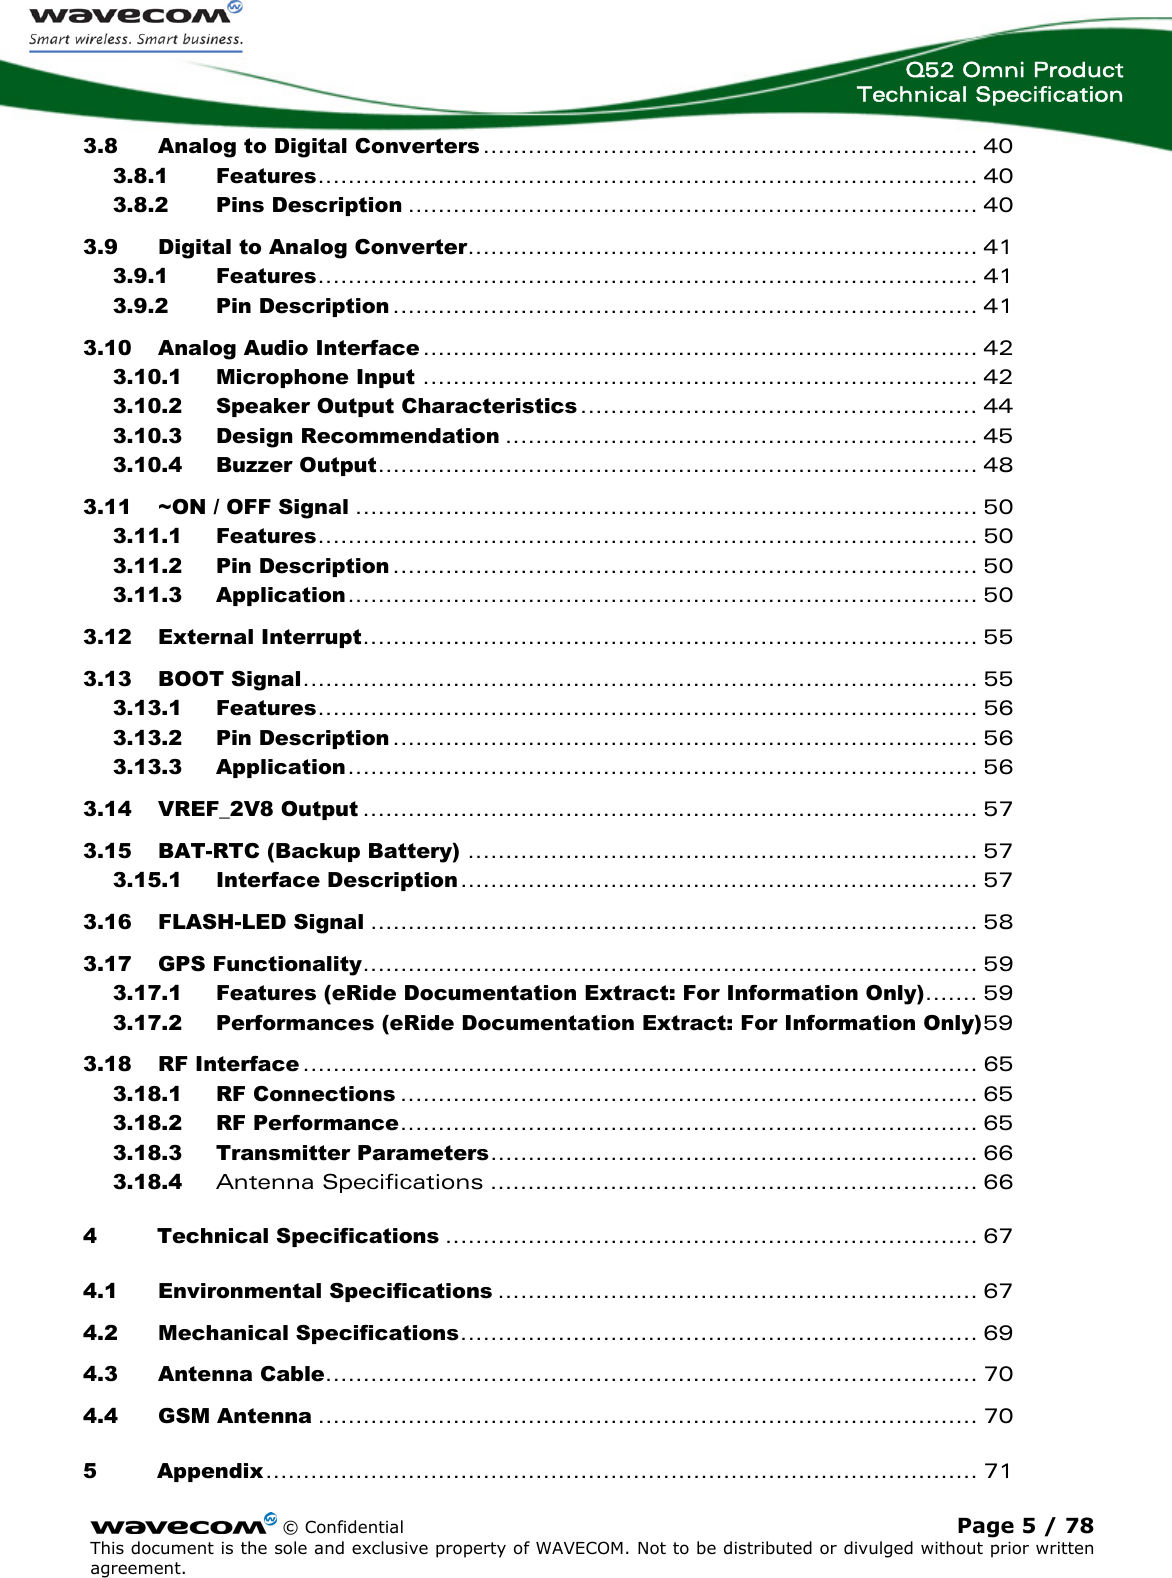  Q52 Omni Product Technical Specification    © Confidential Page 5 / 78 This document is the sole and exclusive property of WAVECOM. Not to be distributed or divulged without prior written agreement.  3.8 Analog to Digital Converters.................................................................. 40 3.8.1 Features........................................................................................ 40 3.8.2 Pins Description ............................................................................ 40 3.9 Digital to Analog Converter.................................................................... 41 3.9.1 Features........................................................................................ 41 3.9.2 Pin Description .............................................................................. 41 3.10 Analog Audio Interface .......................................................................... 42 3.10.1 Microphone Input .......................................................................... 42 3.10.2 Speaker Output Characteristics ..................................................... 44 3.10.3 Design Recommendation ............................................................... 45 3.10.4 Buzzer Output................................................................................ 48 3.11 ~ON / OFF Signal ................................................................................... 50 3.11.1 Features........................................................................................ 50 3.11.2 Pin Description .............................................................................. 50 3.11.3 Application.................................................................................... 50 3.12 External Interrupt.................................................................................. 55 3.13 BOOT Signal.......................................................................................... 55 3.13.1 Features........................................................................................ 56 3.13.2 Pin Description .............................................................................. 56 3.13.3 Application.................................................................................... 56 3.14 VREF_2V8 Output .................................................................................. 57 3.15 BAT-RTC (Backup Battery) .................................................................... 57 3.15.1 Interface Description..................................................................... 57 3.16 FLASH-LED Signal ................................................................................. 58 3.17 GPS Functionality.................................................................................. 59 3.17.1 Features (eRide Documentation Extract: For Information Only)....... 59 3.17.2 Performances (eRide Documentation Extract: For Information Only)59 3.18 RF Interface .......................................................................................... 65 3.18.1 RF Connections ............................................................................. 65 3.18.2 RF Performance............................................................................. 65 3.18.3 Transmitter Parameters................................................................. 66 3.18.4 Antenna Specifications ................................................................. 66 4 Technical Specifications ....................................................................... 67 4.1 Environmental Specifications ................................................................ 67 4.2 Mechanical Specifications..................................................................... 69 4.3 Antenna Cable....................................................................................... 70 4.4 GSM Antenna ........................................................................................ 70 5 Appendix............................................................................................... 71 